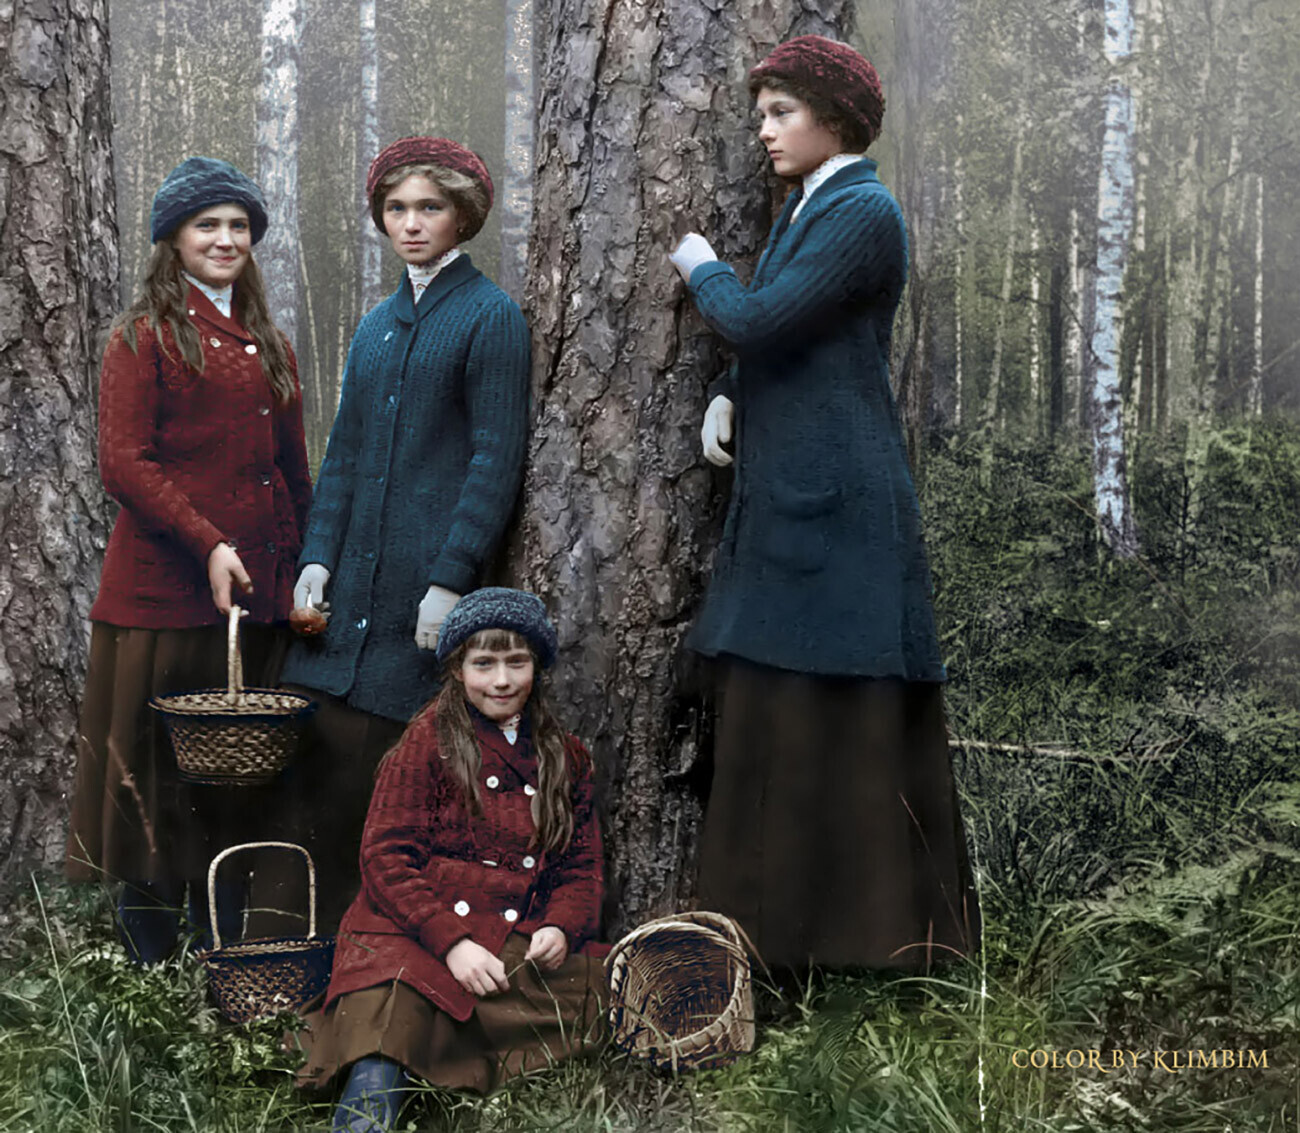 The Grand Duchesses hunting for mushrooms in a forest.